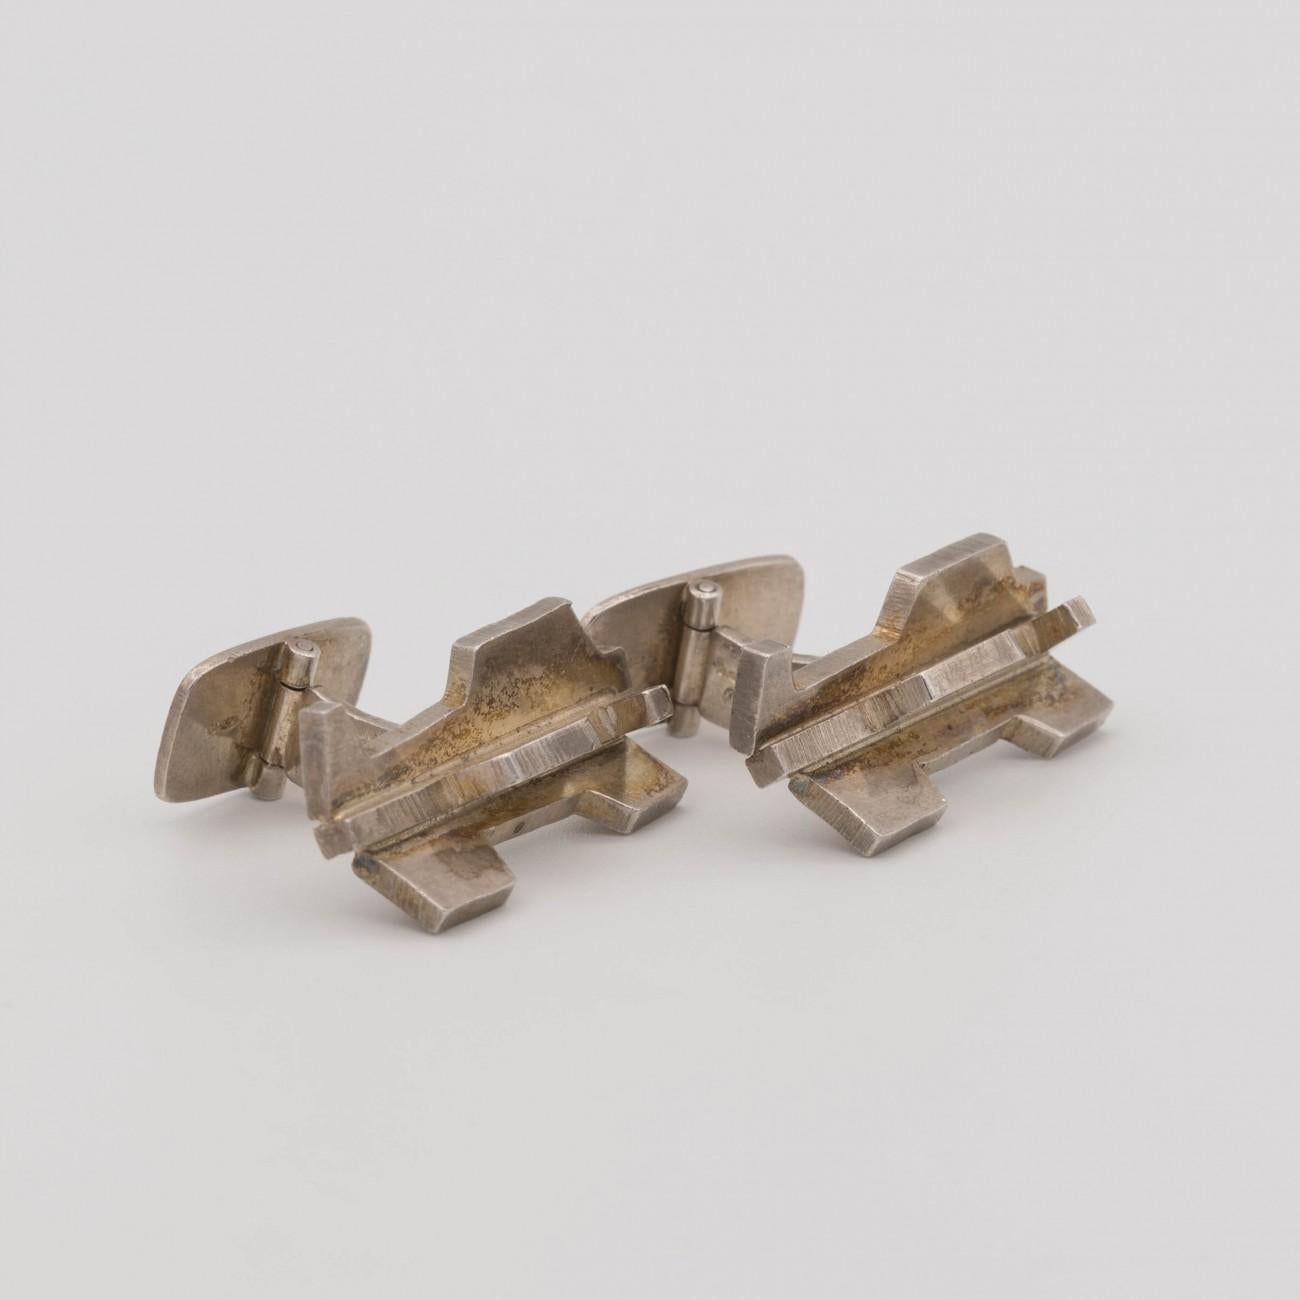 Danish Silver Sculptural Modernist Silver Cufflinks by Rey Urban for Age Fausing, 1972